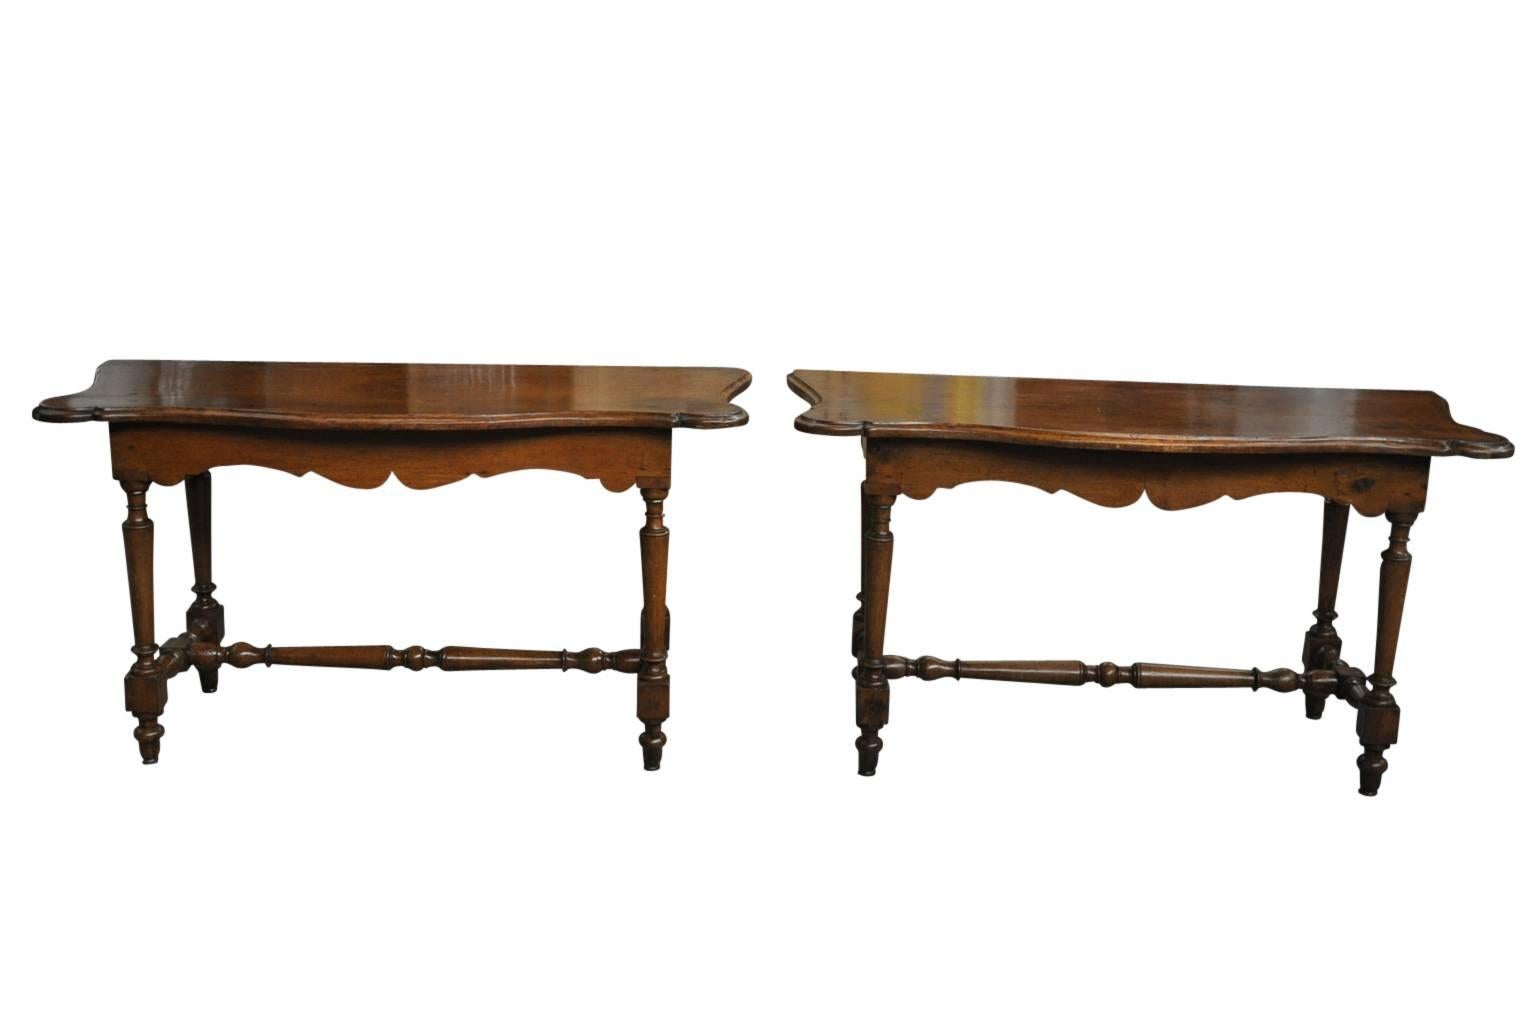 An outstanding and stunning pair of 18th century Italian console tables from Tuscany. Expertly crafted from walnut with a shaped top surface with beautiful edge finish, sculpted aprons and turned legs and stretchers. The patina is very rich and